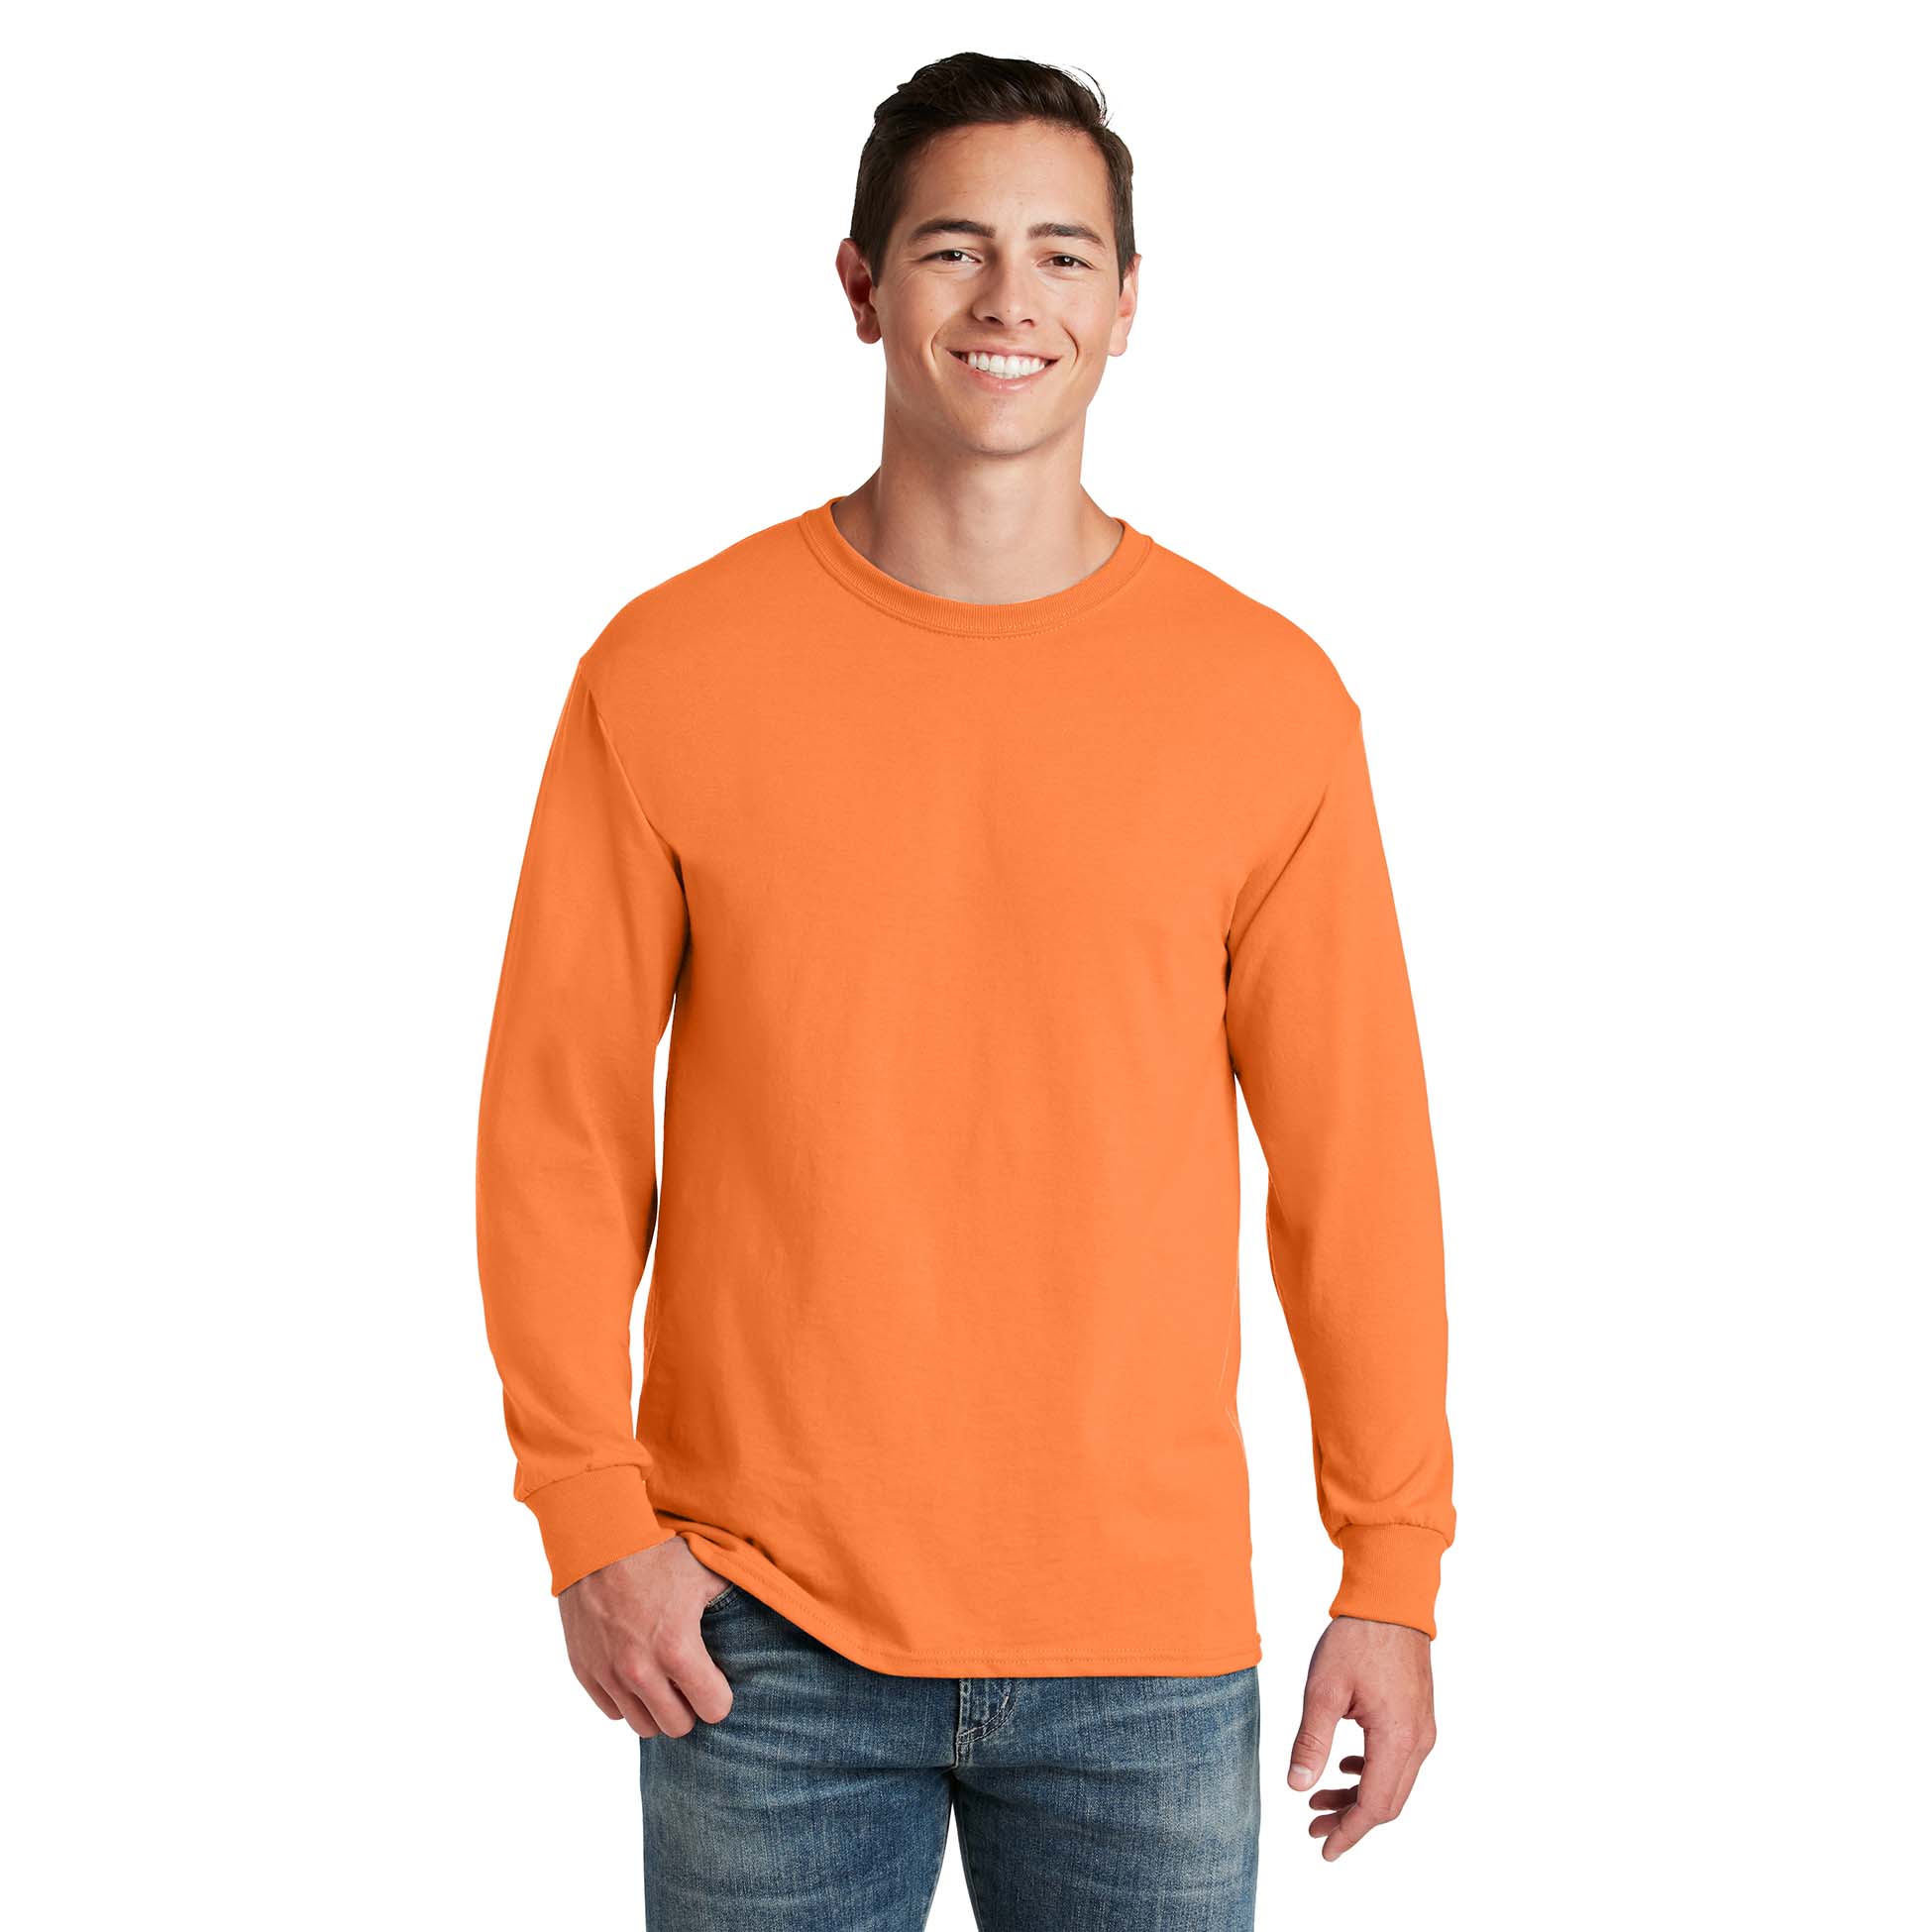 Jerzees 29LS Dri-Power 50/50 Cotton/Poly Long Sleeve T-Shirt - Safety ...